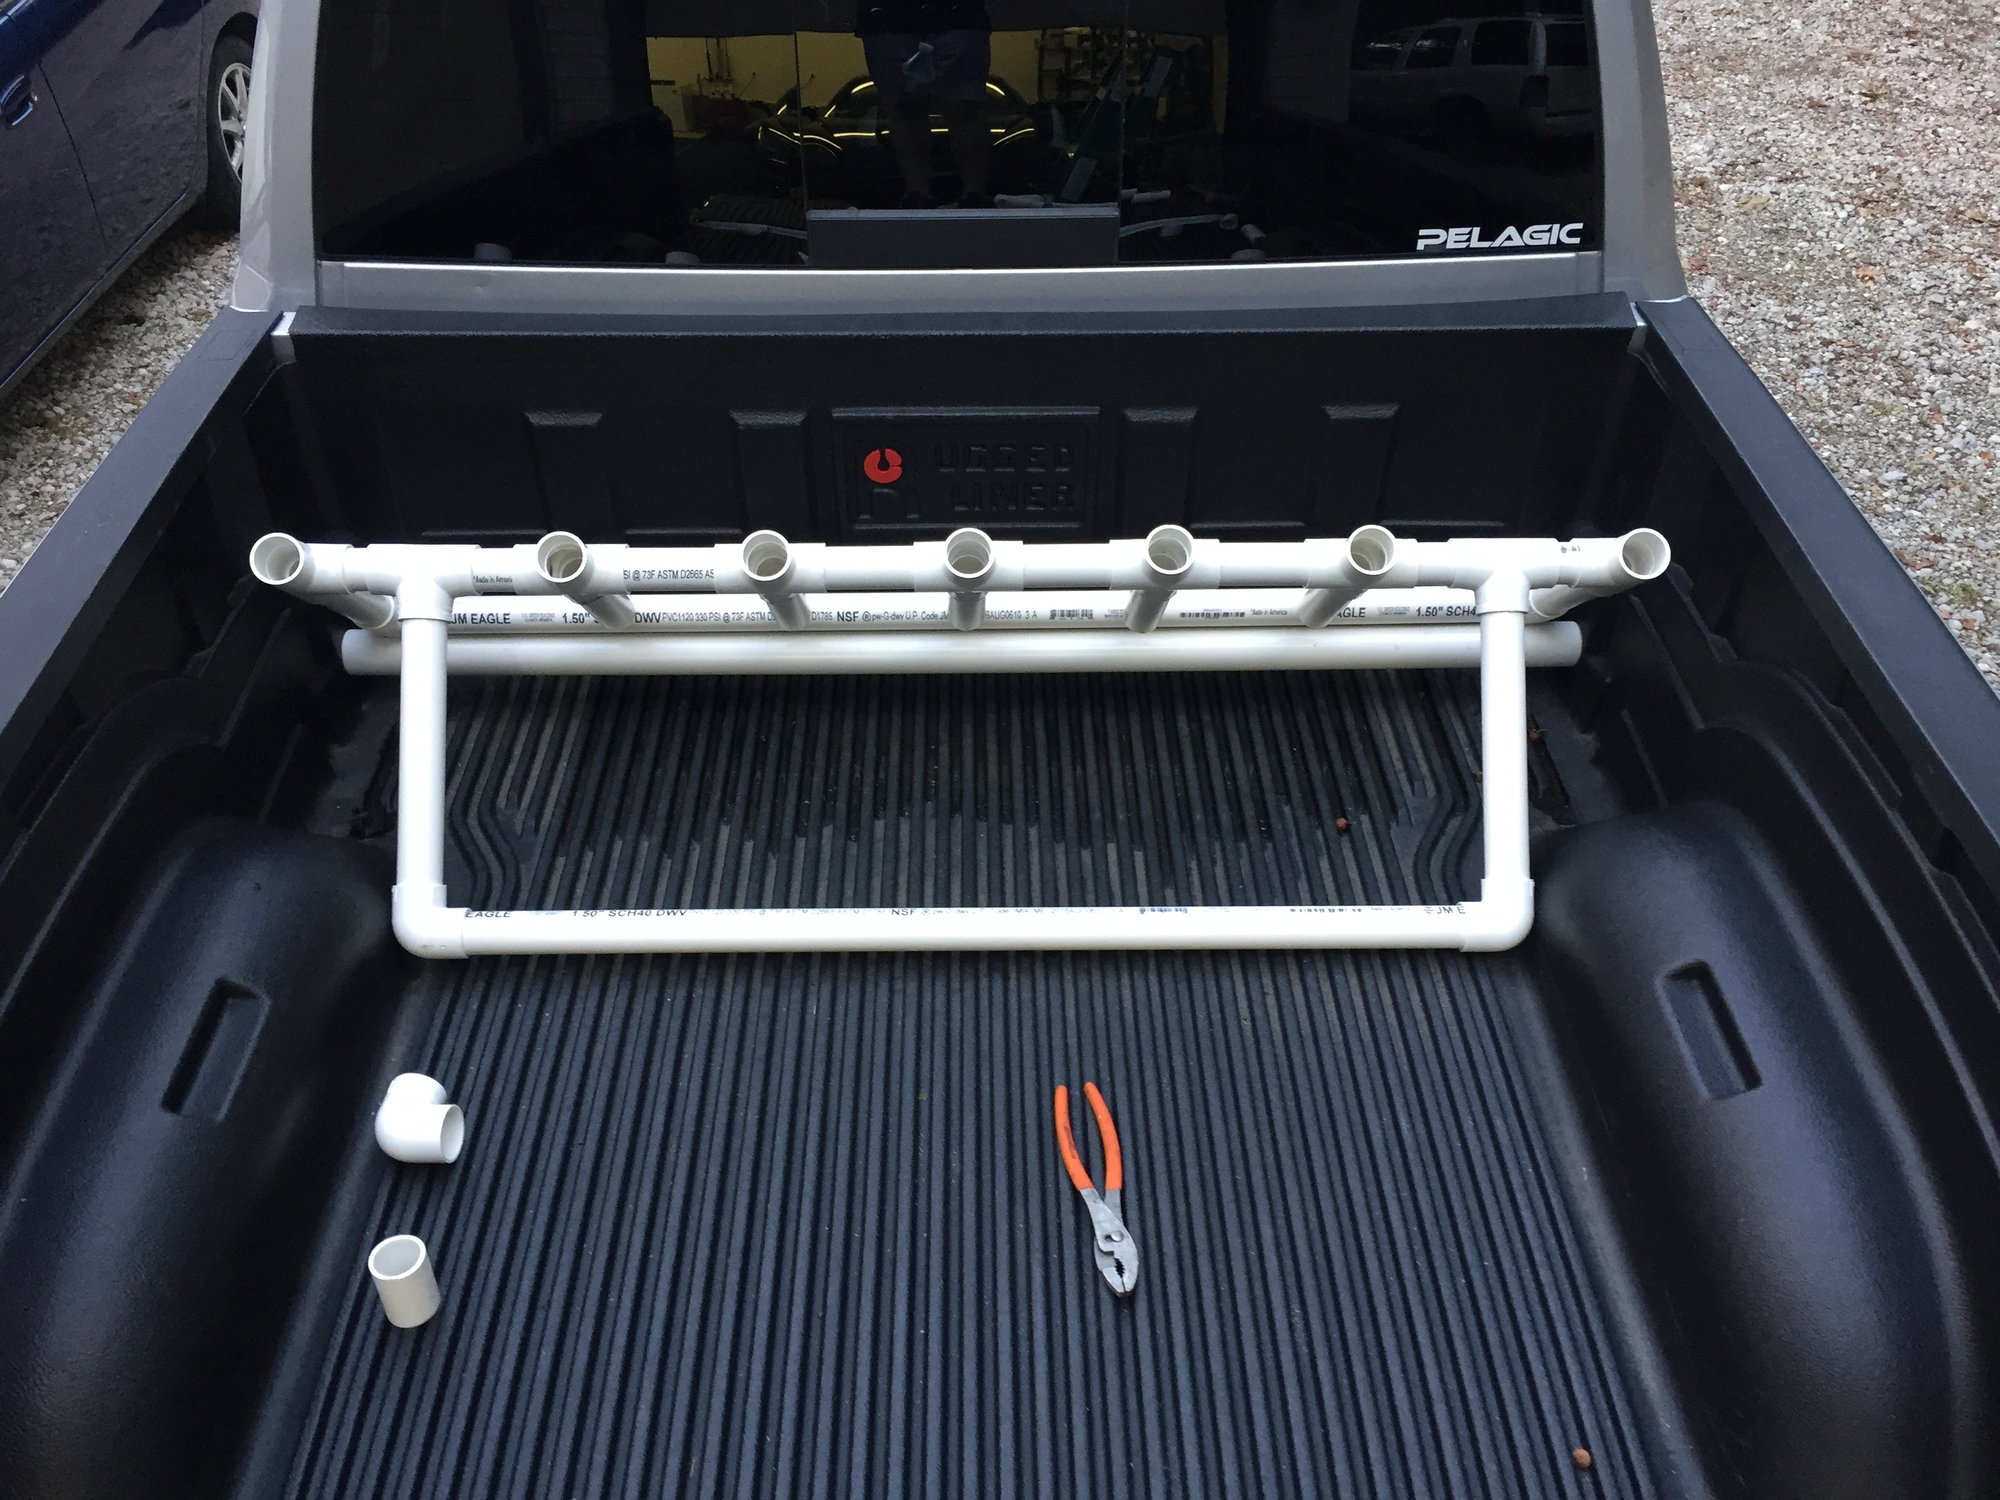 Truck bed rod holder setups - Page 2 - The Hull Truth - Boating and Fishing  Forum